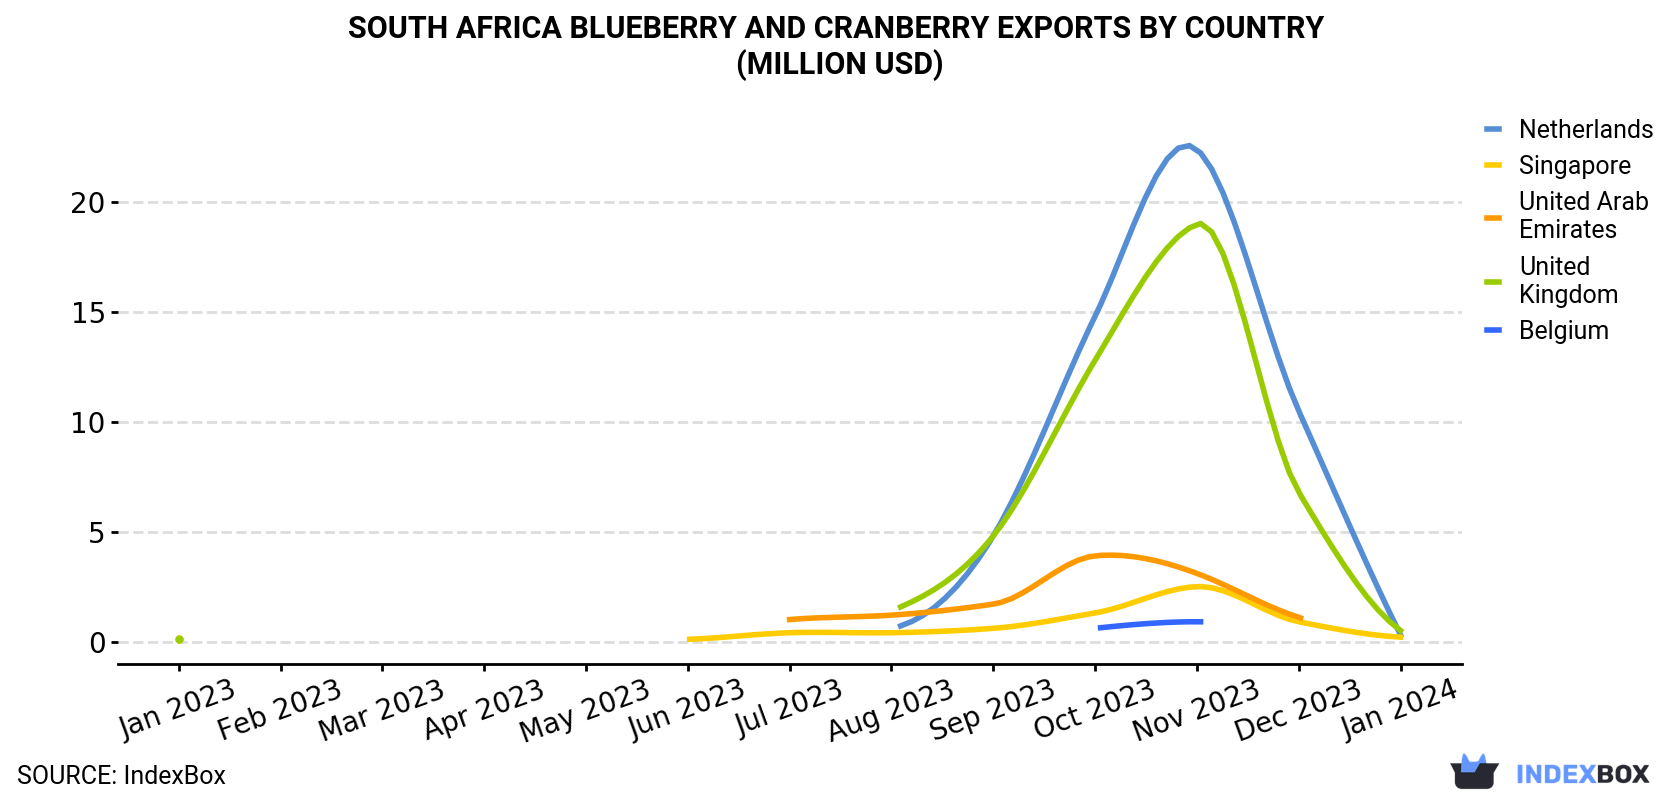 South Africa Blueberry And Cranberry Exports By Country (Million USD)